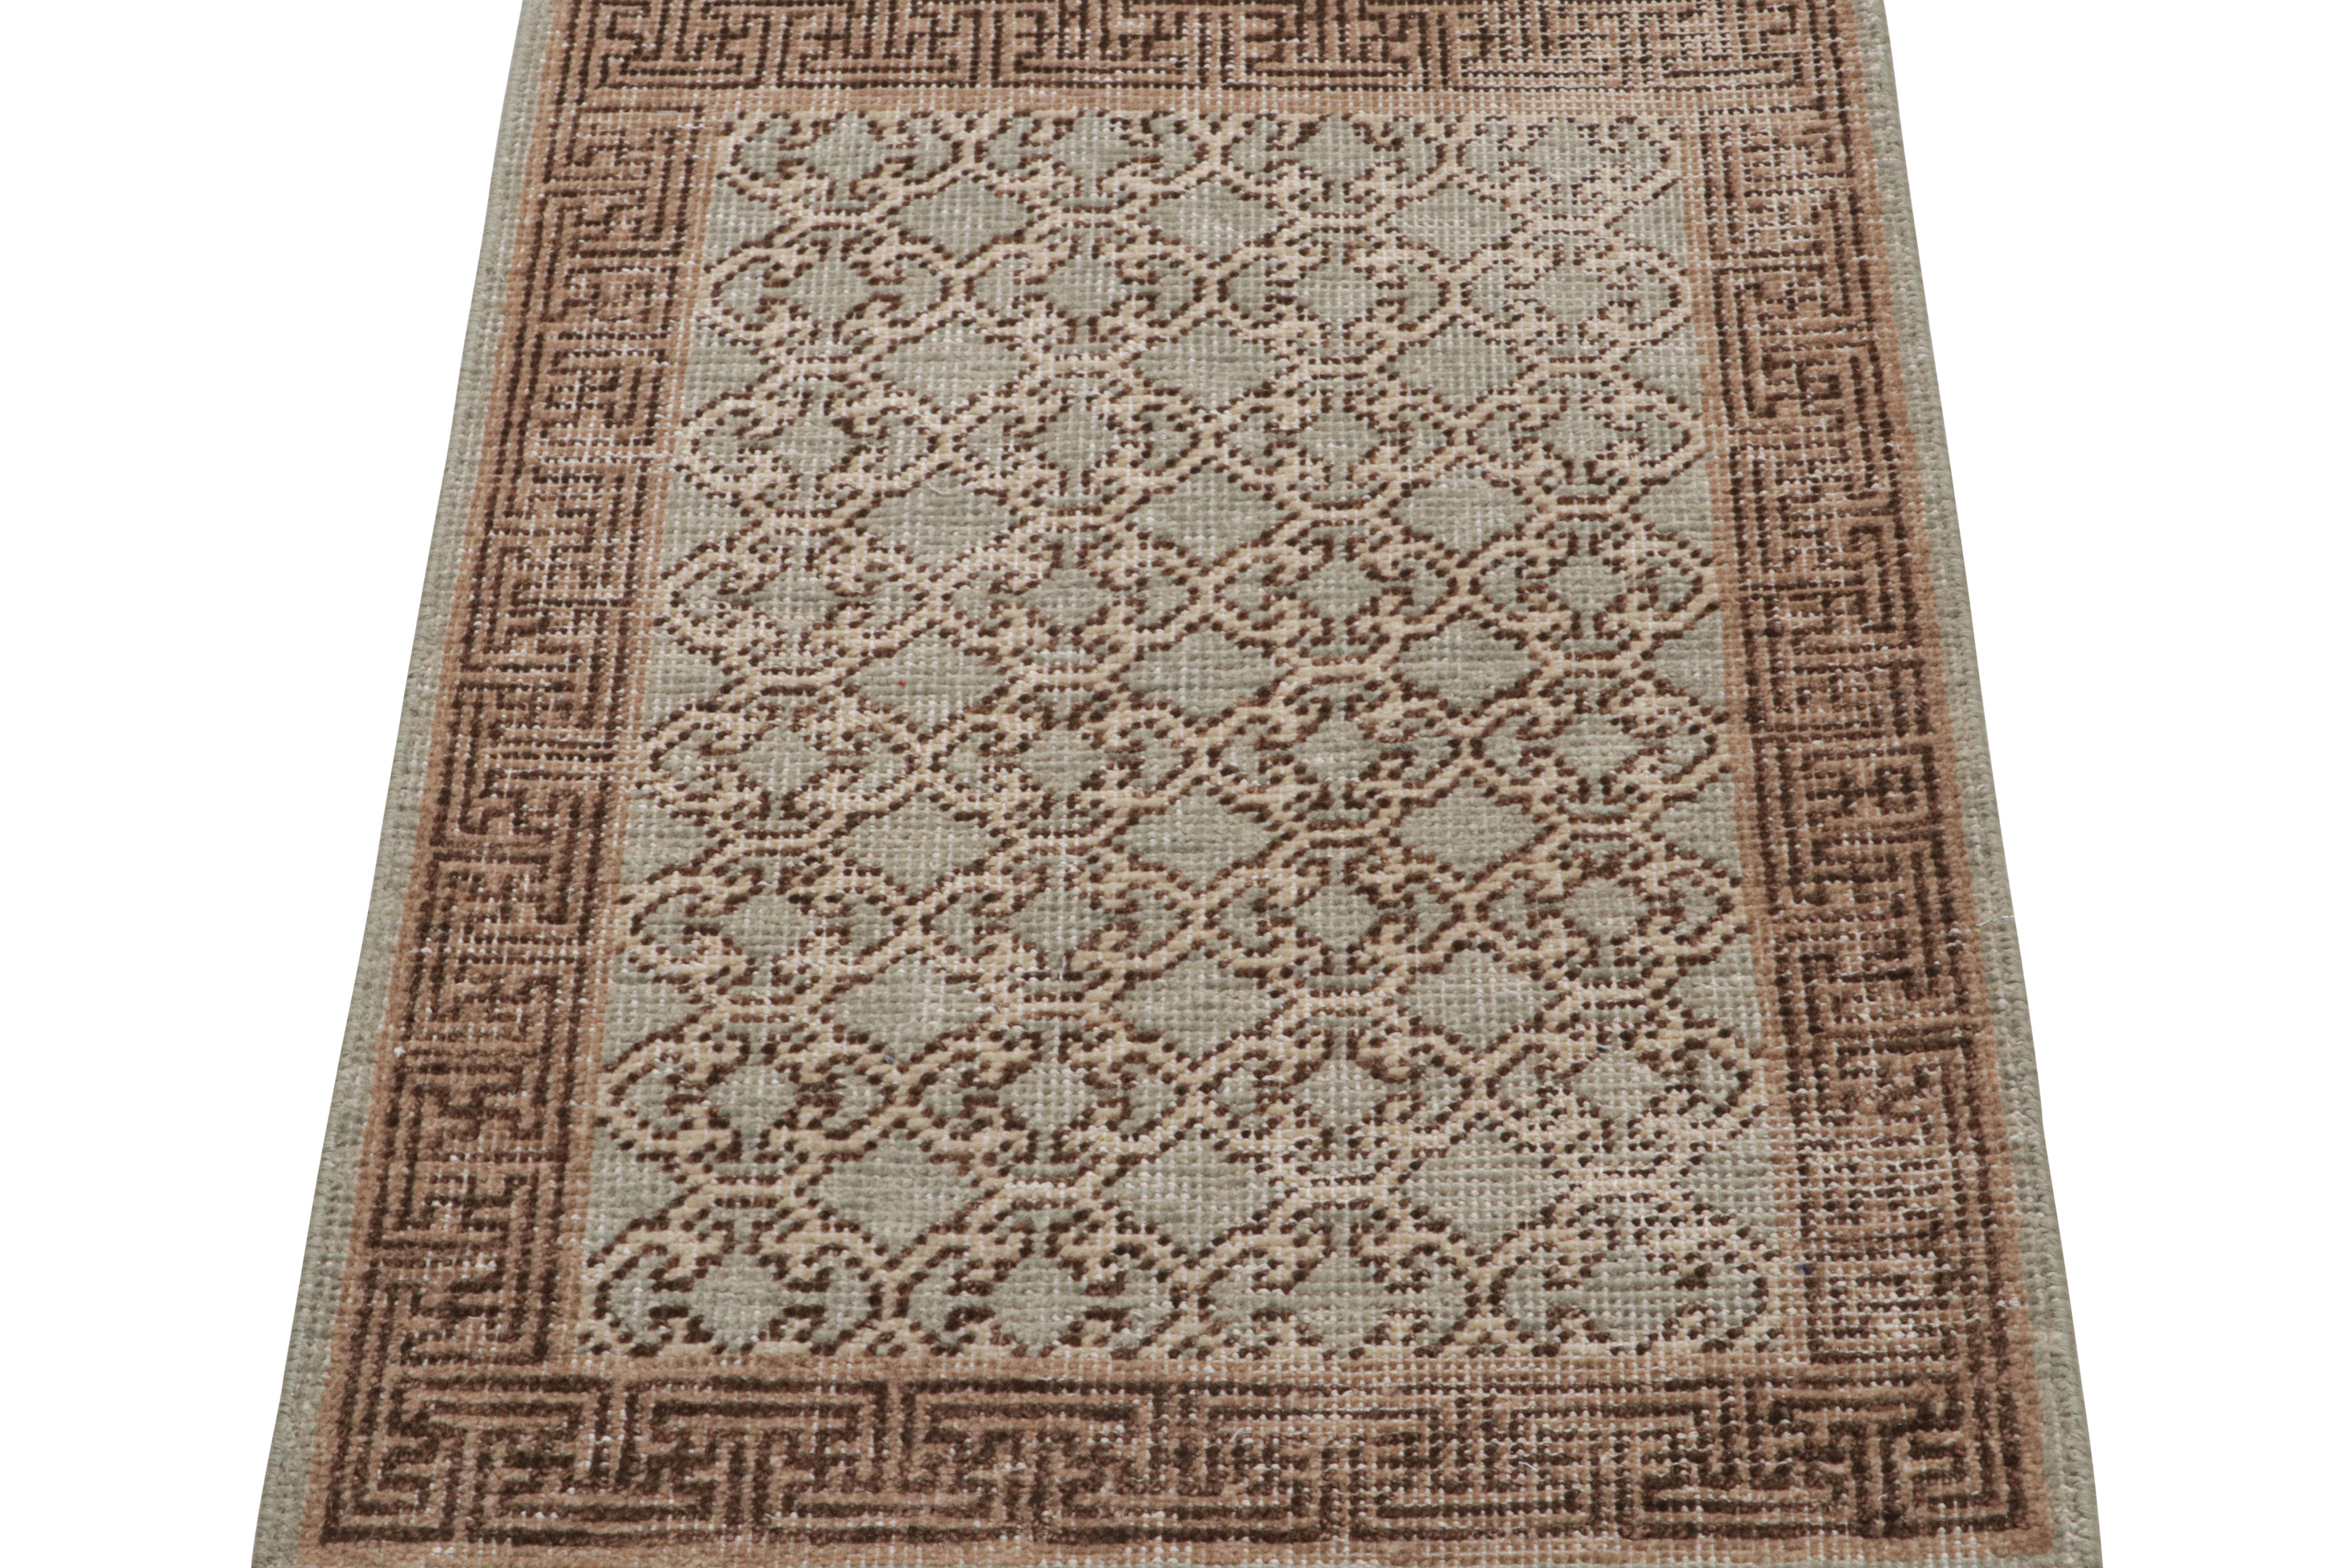 Hand-knotted in wool, this 2x3 rug from Rug & Kilim is inspired by Khotan Samarkand Rugs. 

On the Design: 

The pattern features light gray with a sage green accent underscoring geometric trellis patterns in beige-brown tones in the field, with